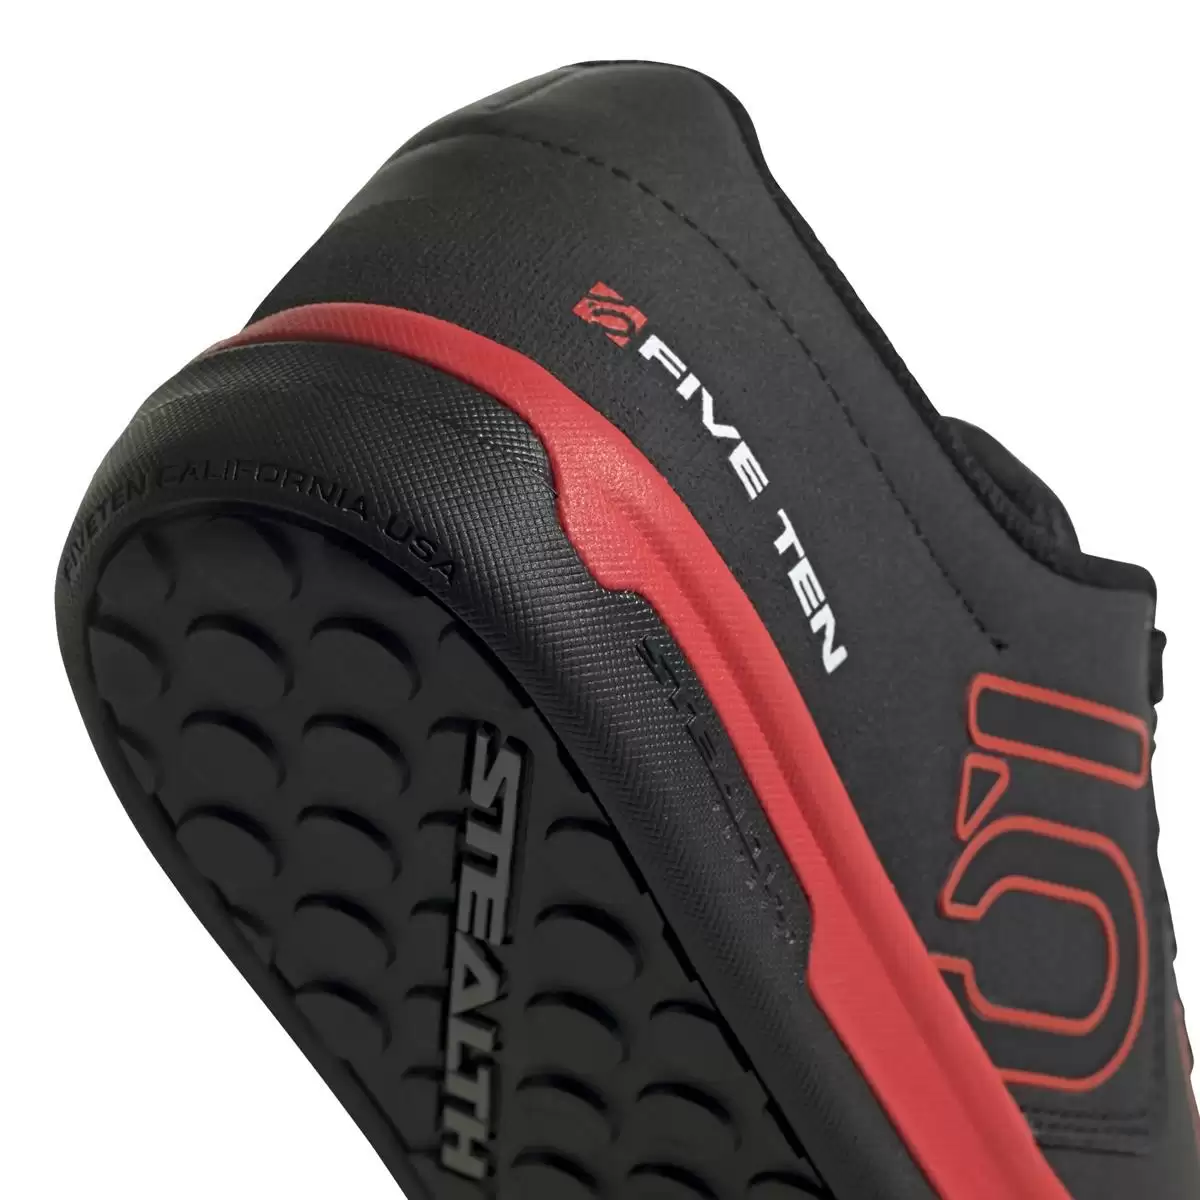 Chaussures Plates VTT Freerider Pro Noir/Rouge Taille 44 #5